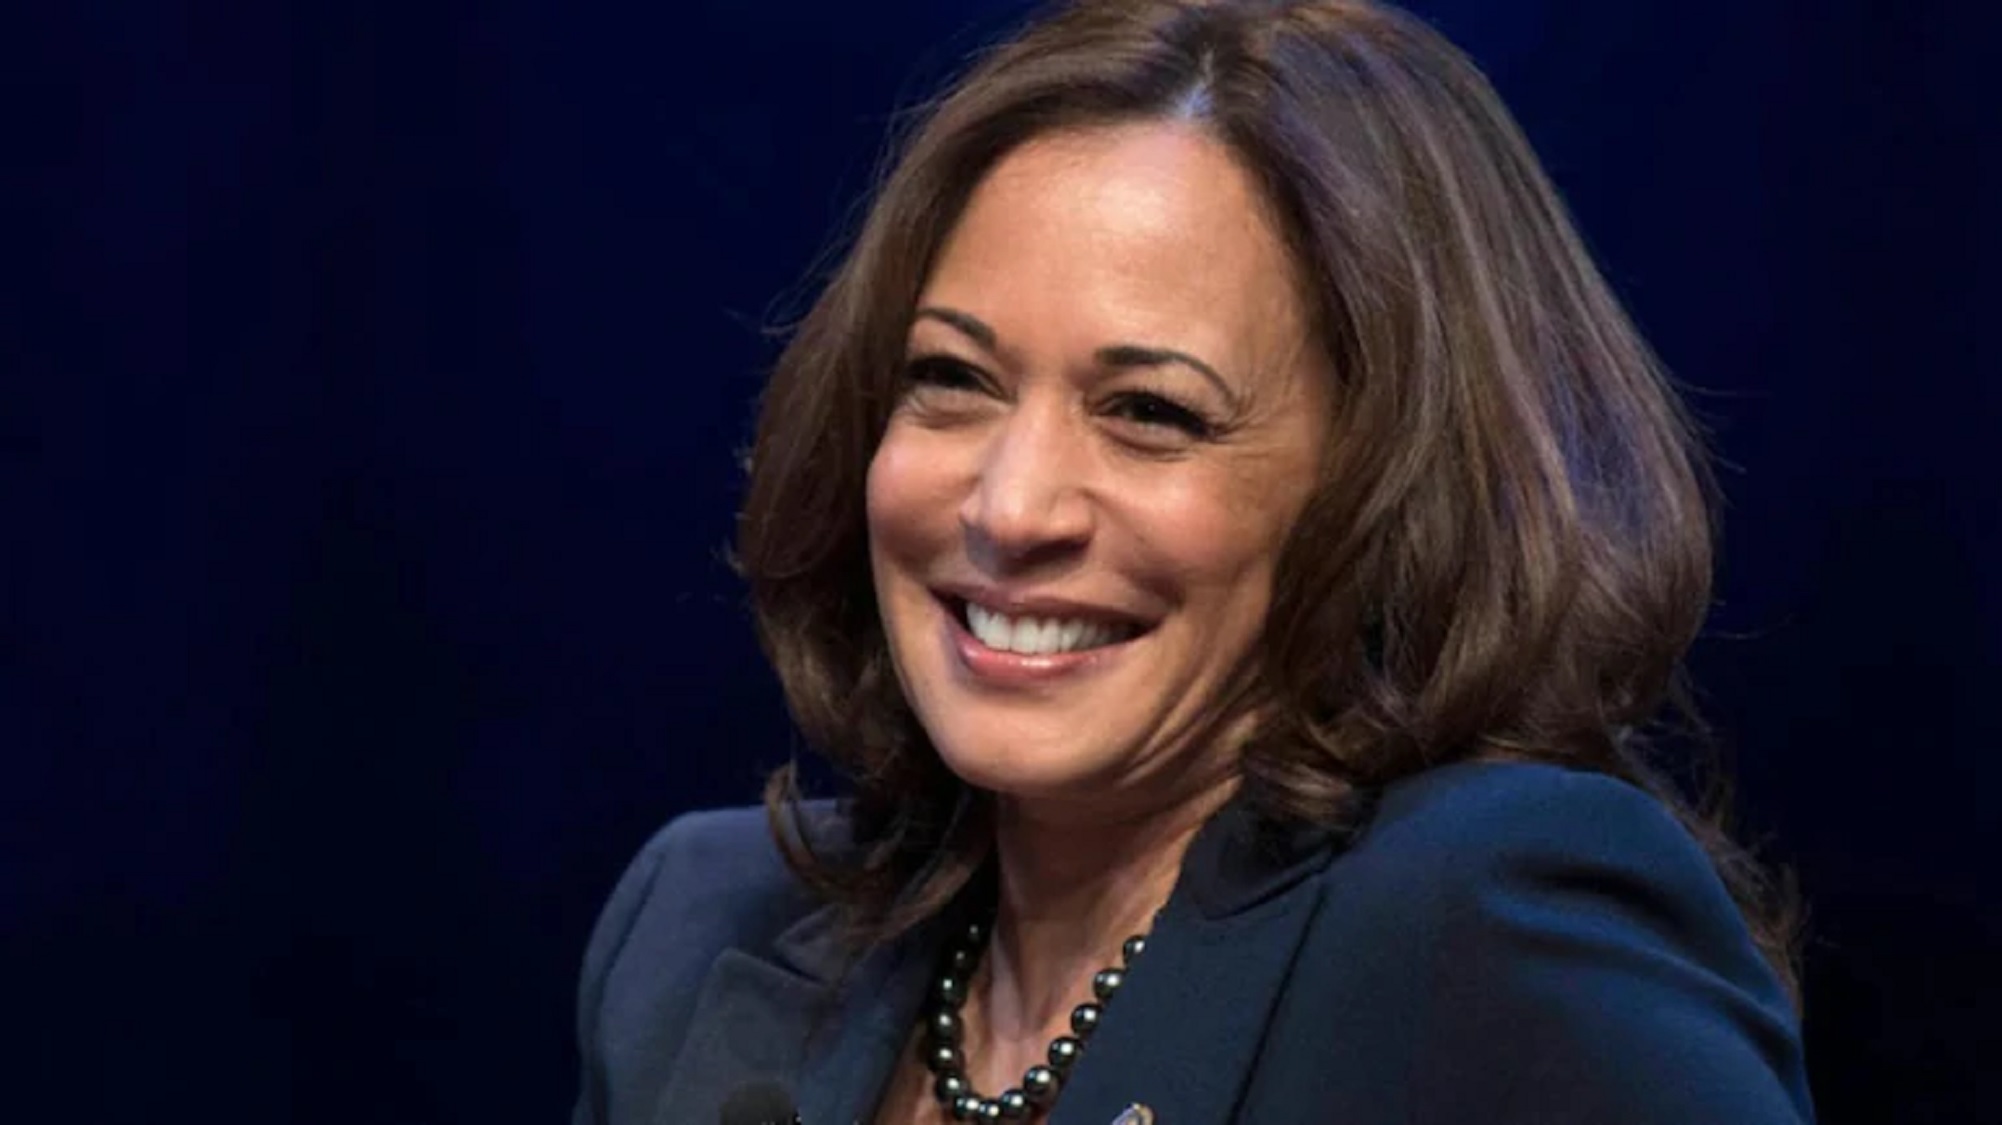 Kamala Harris Talks About Her Half Indian Roots, Her Childhood Trips To India With Her Mother